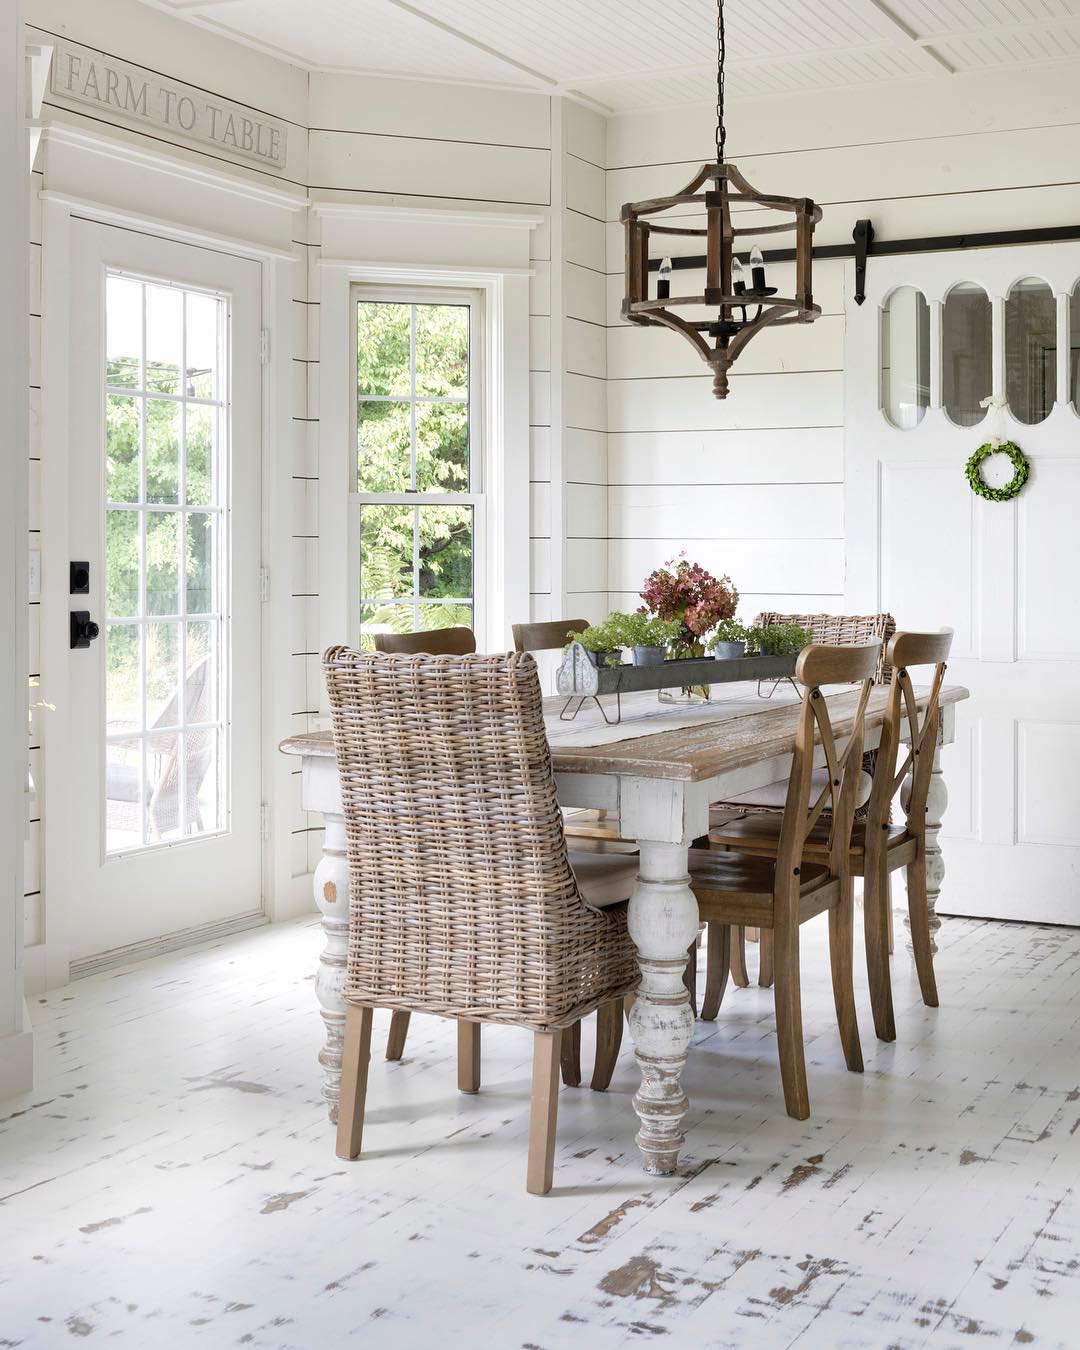 How to get the Farmhouse Style Dining Room